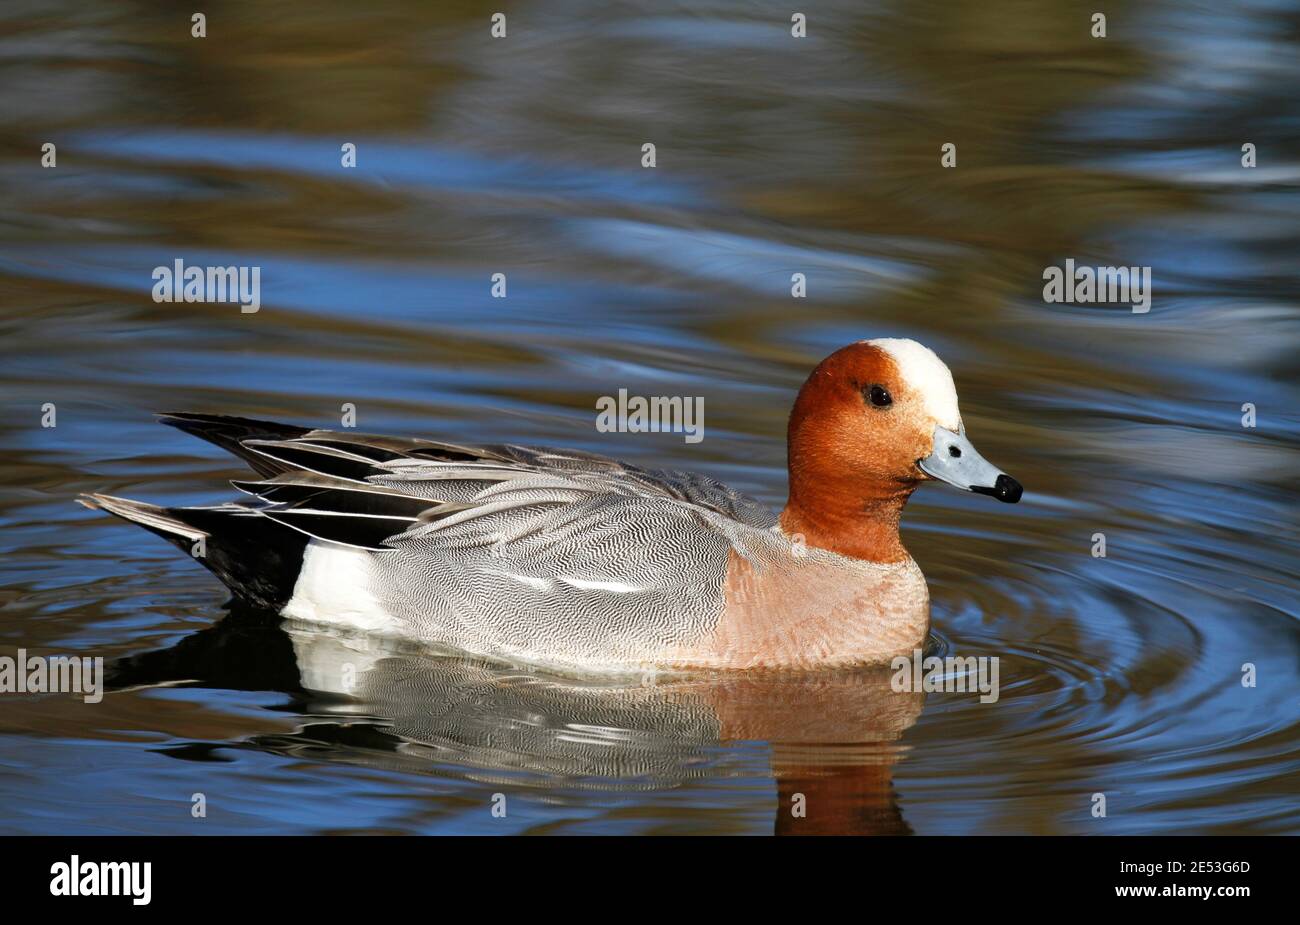 Male Eurasian wigeon, Mareca penelope, swimming in a pond in Tampere Finland. Stock Photo